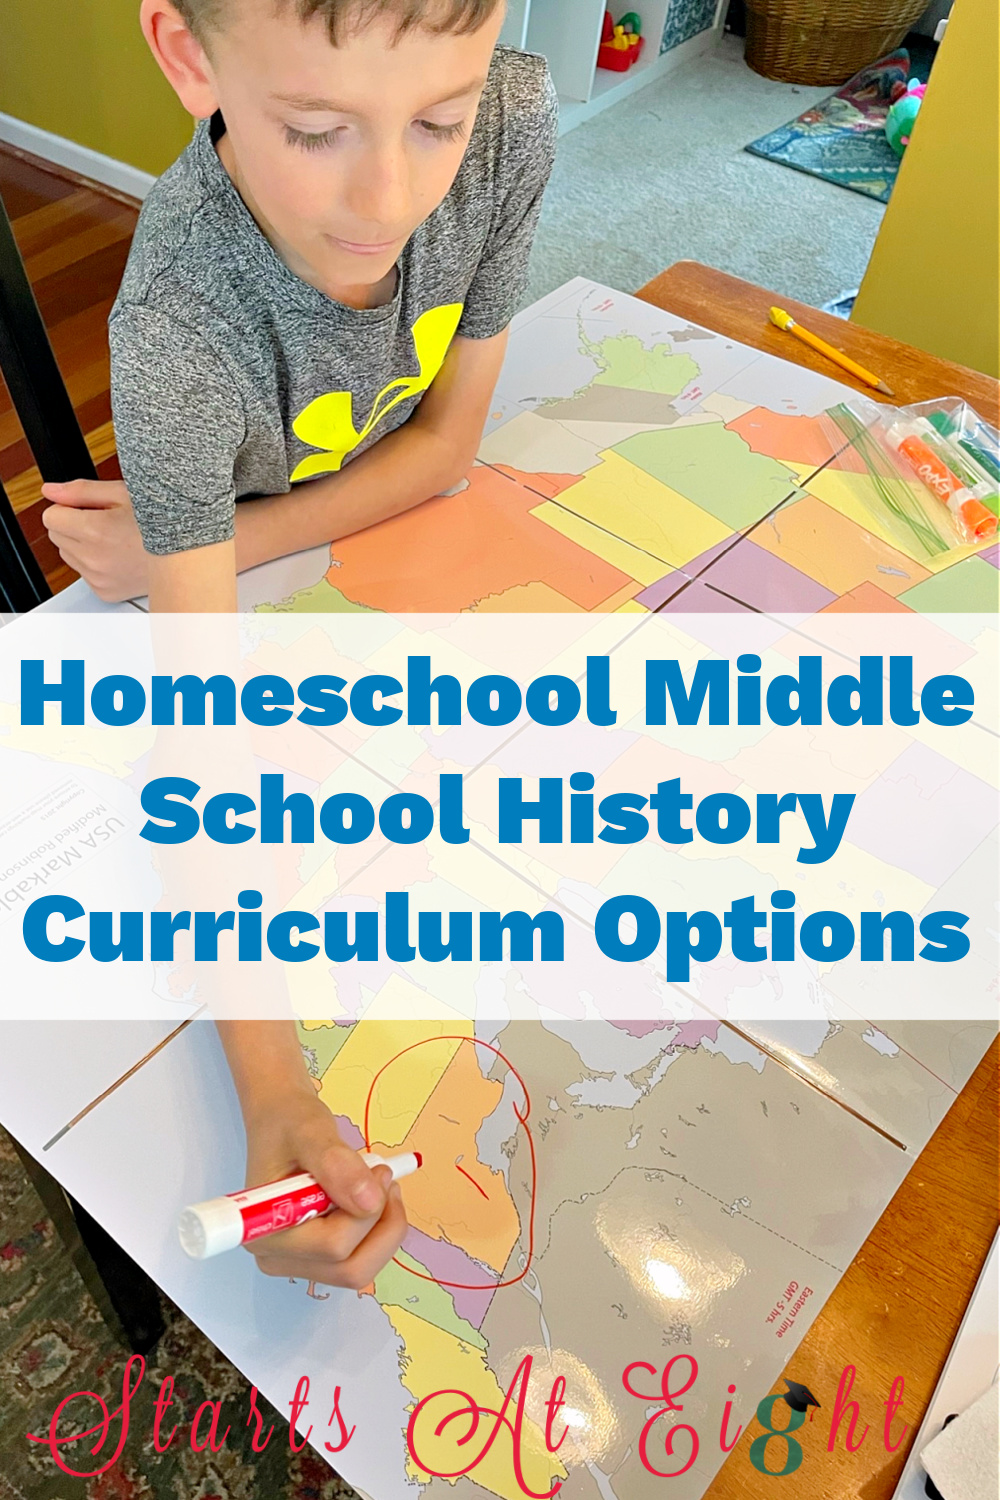 This collection of Homeschool Middle School History options. includes literature and textbook options as well as World and American History.